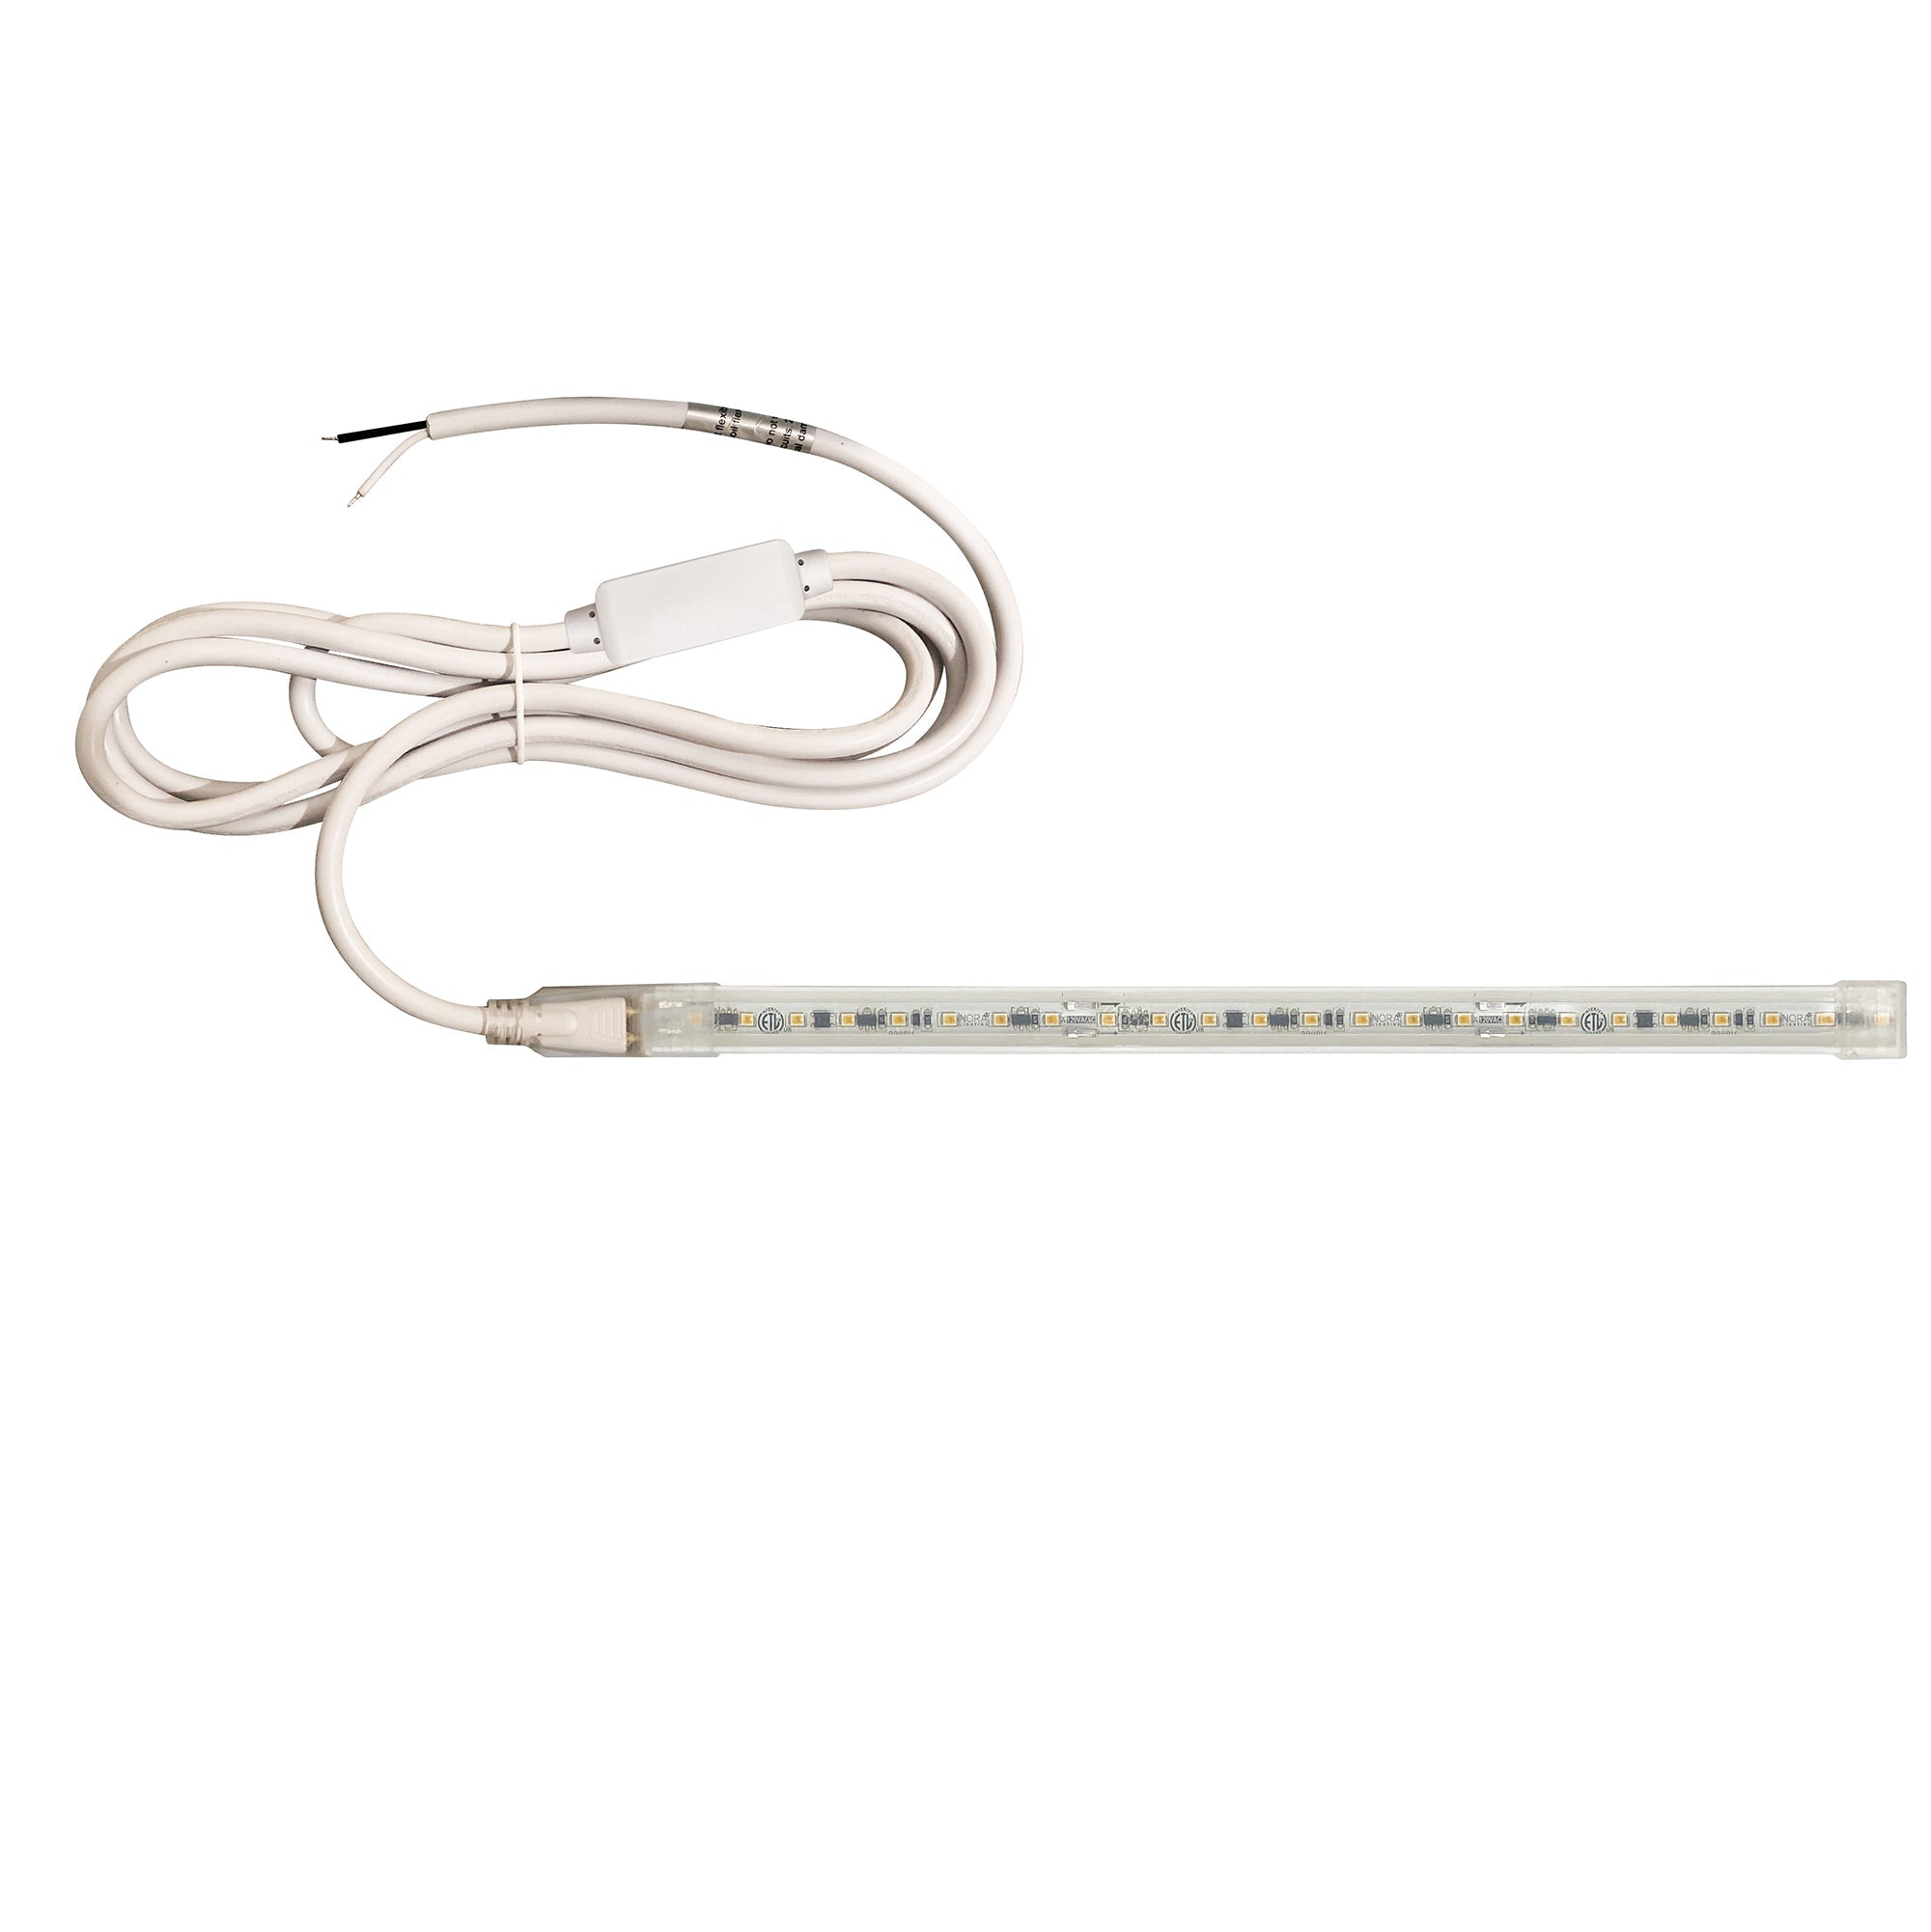 Nora Lighting NUTP13-W67-8-12-930/HWSP - Accent / Undercabinet - Custom Cut 67-ft, 8-in 120V Continuous LED Tape Light, 330lm / 3.6W per foot, 3000K, w/ Mounting Clips and 8' Hardwired Power Cord w/ Surge Protector